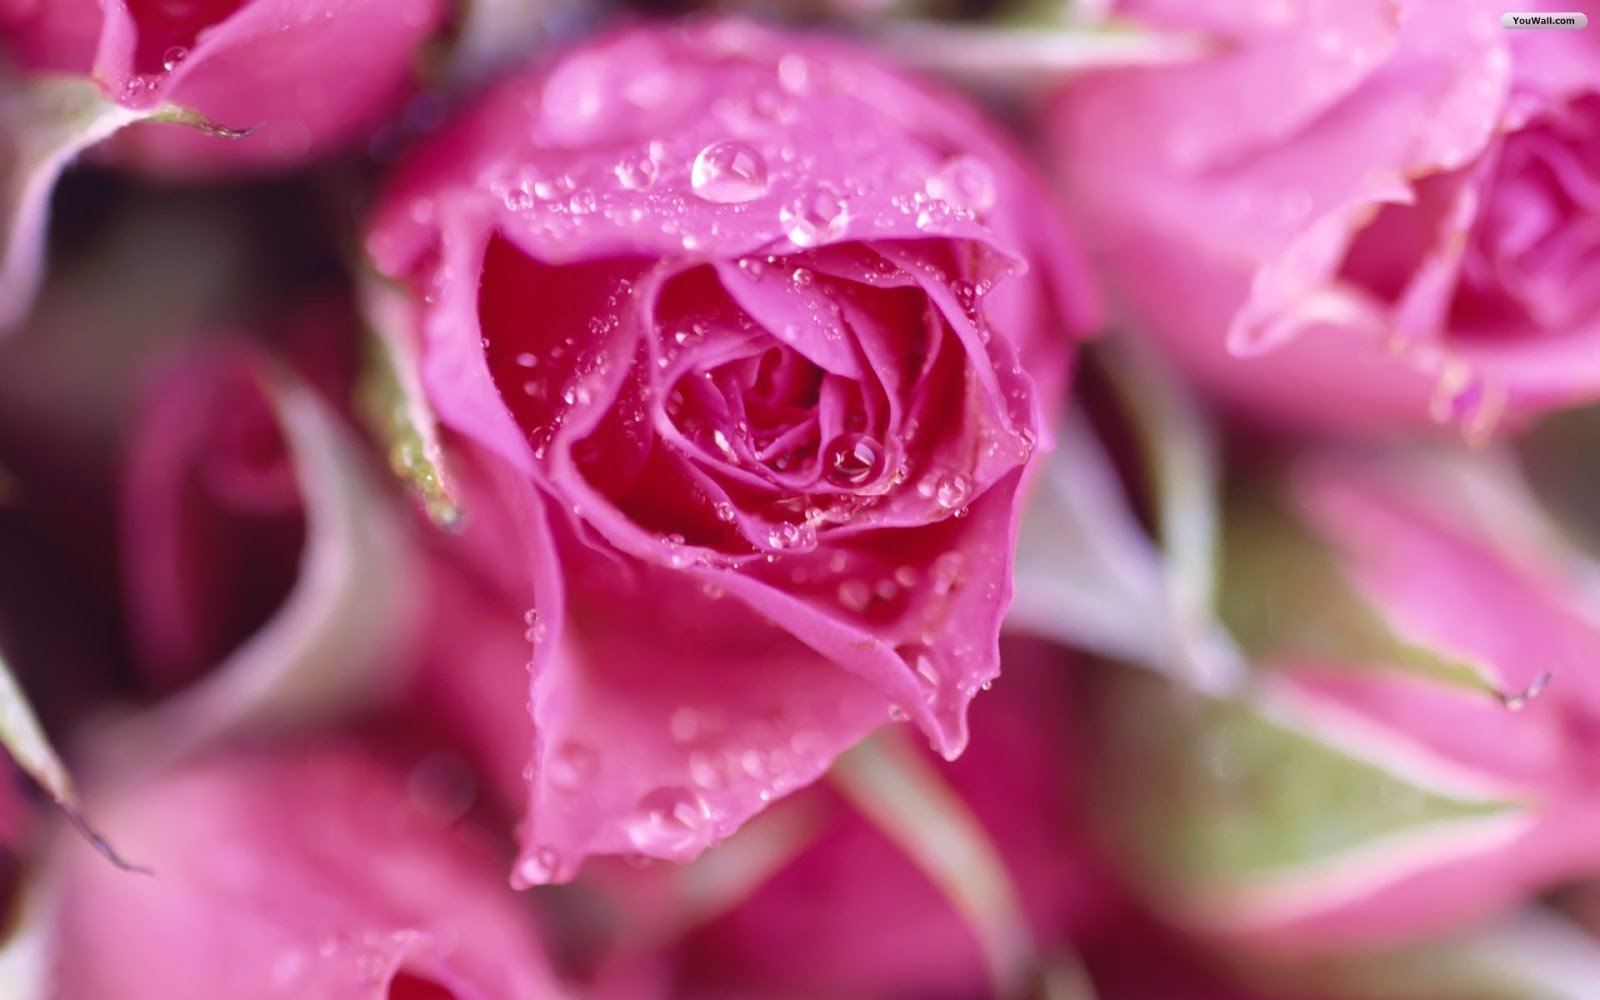  roses pics of pink roses pink roses background wallpapers 1600x1000